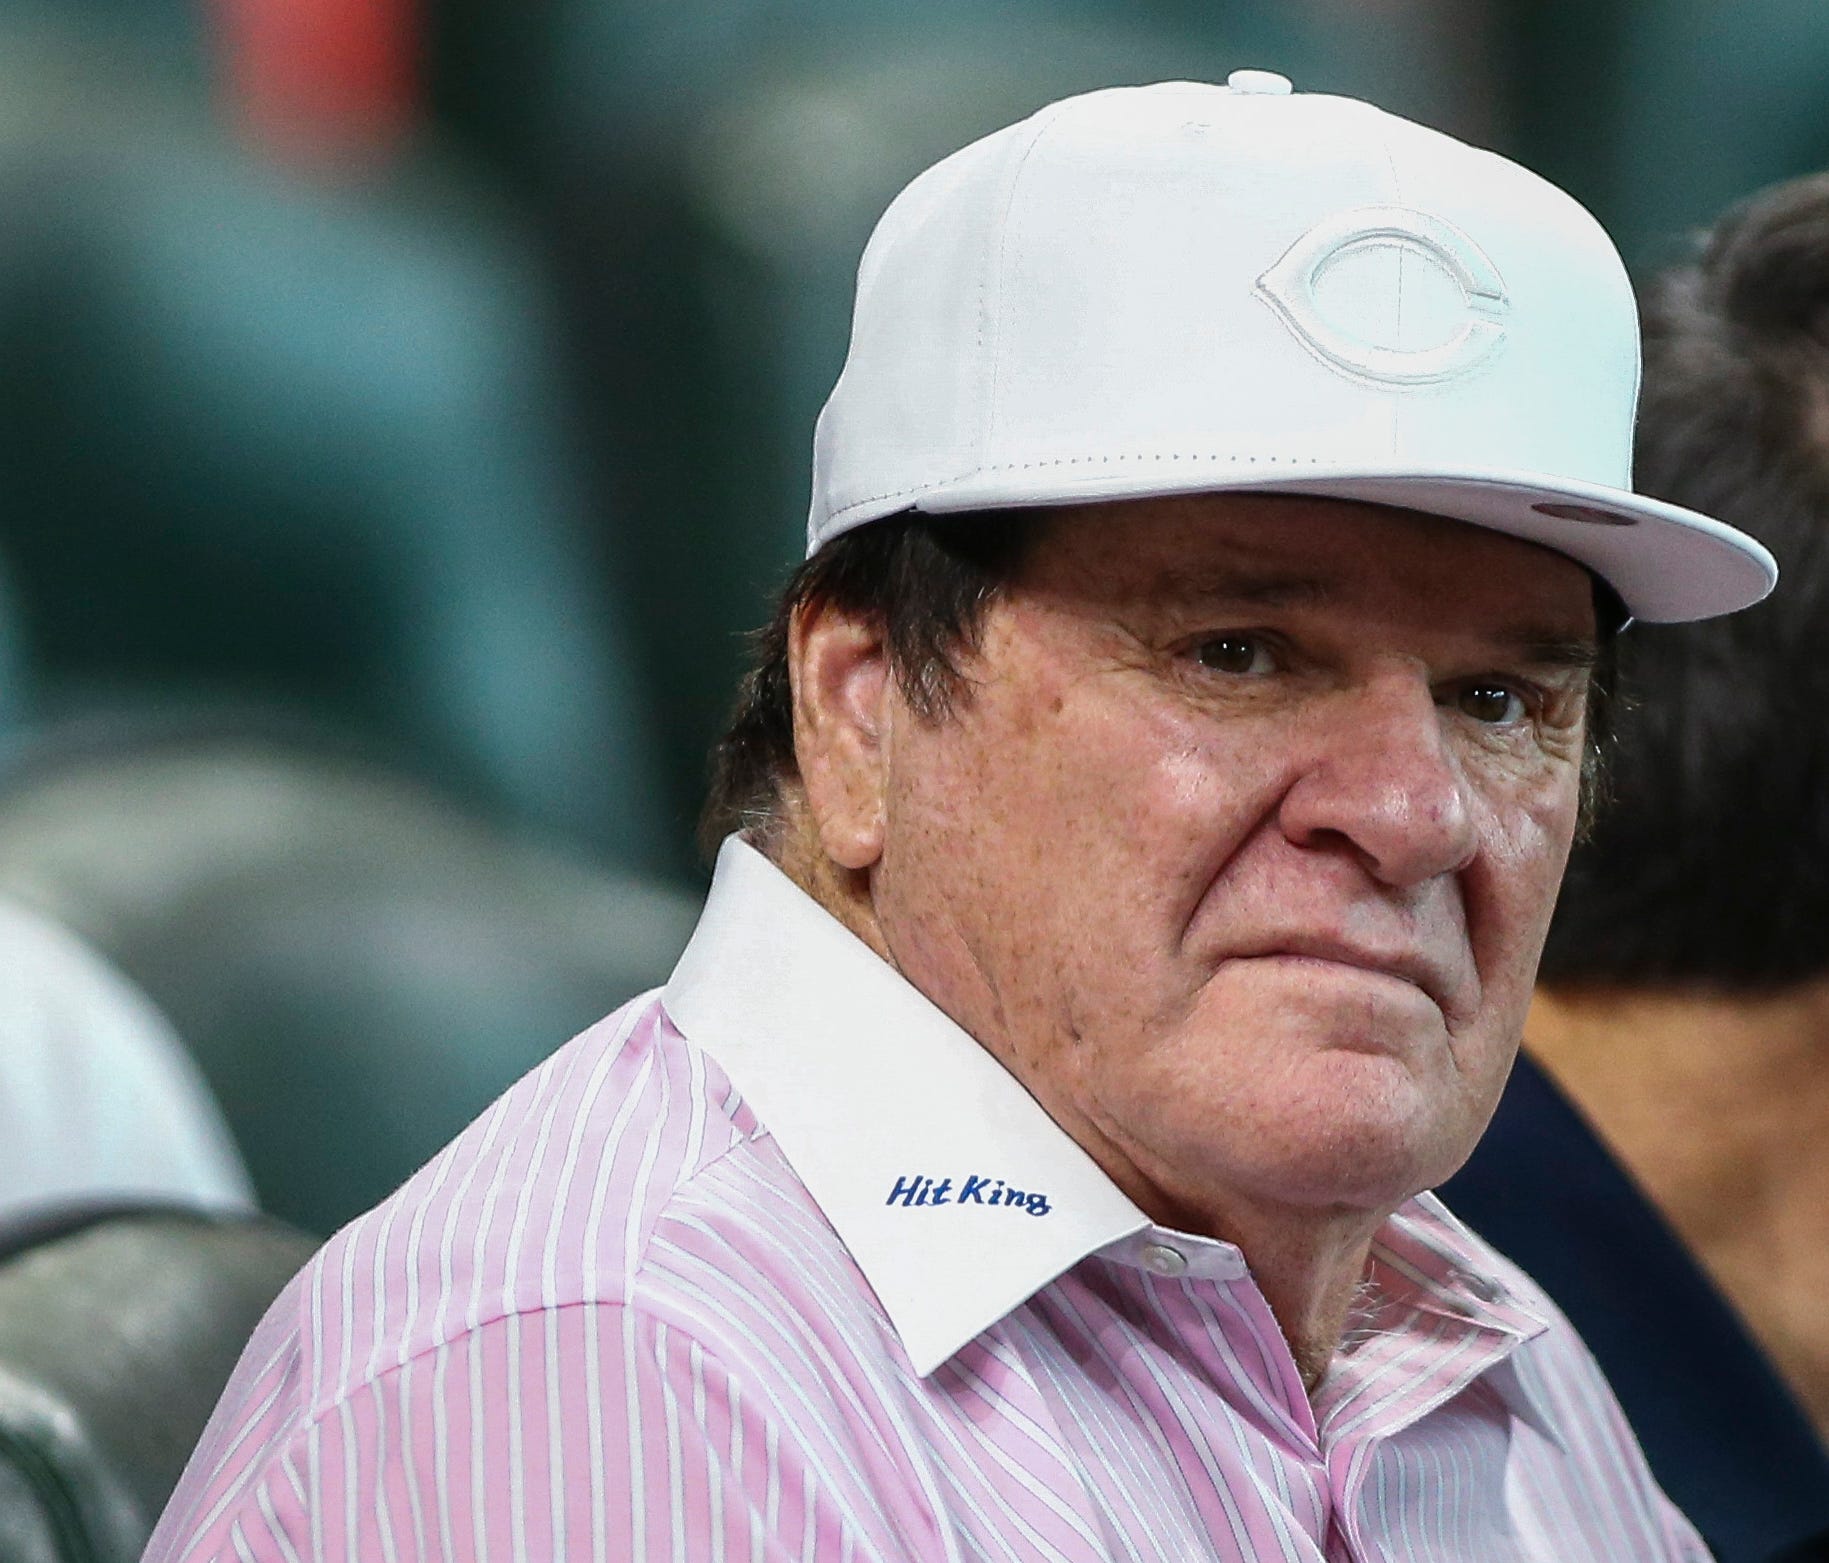 Former major league player and manager Pete Rose watches a game between the Houston Astros and the Cincinnati Reds at Minute Maid Park on June 17, 2016.